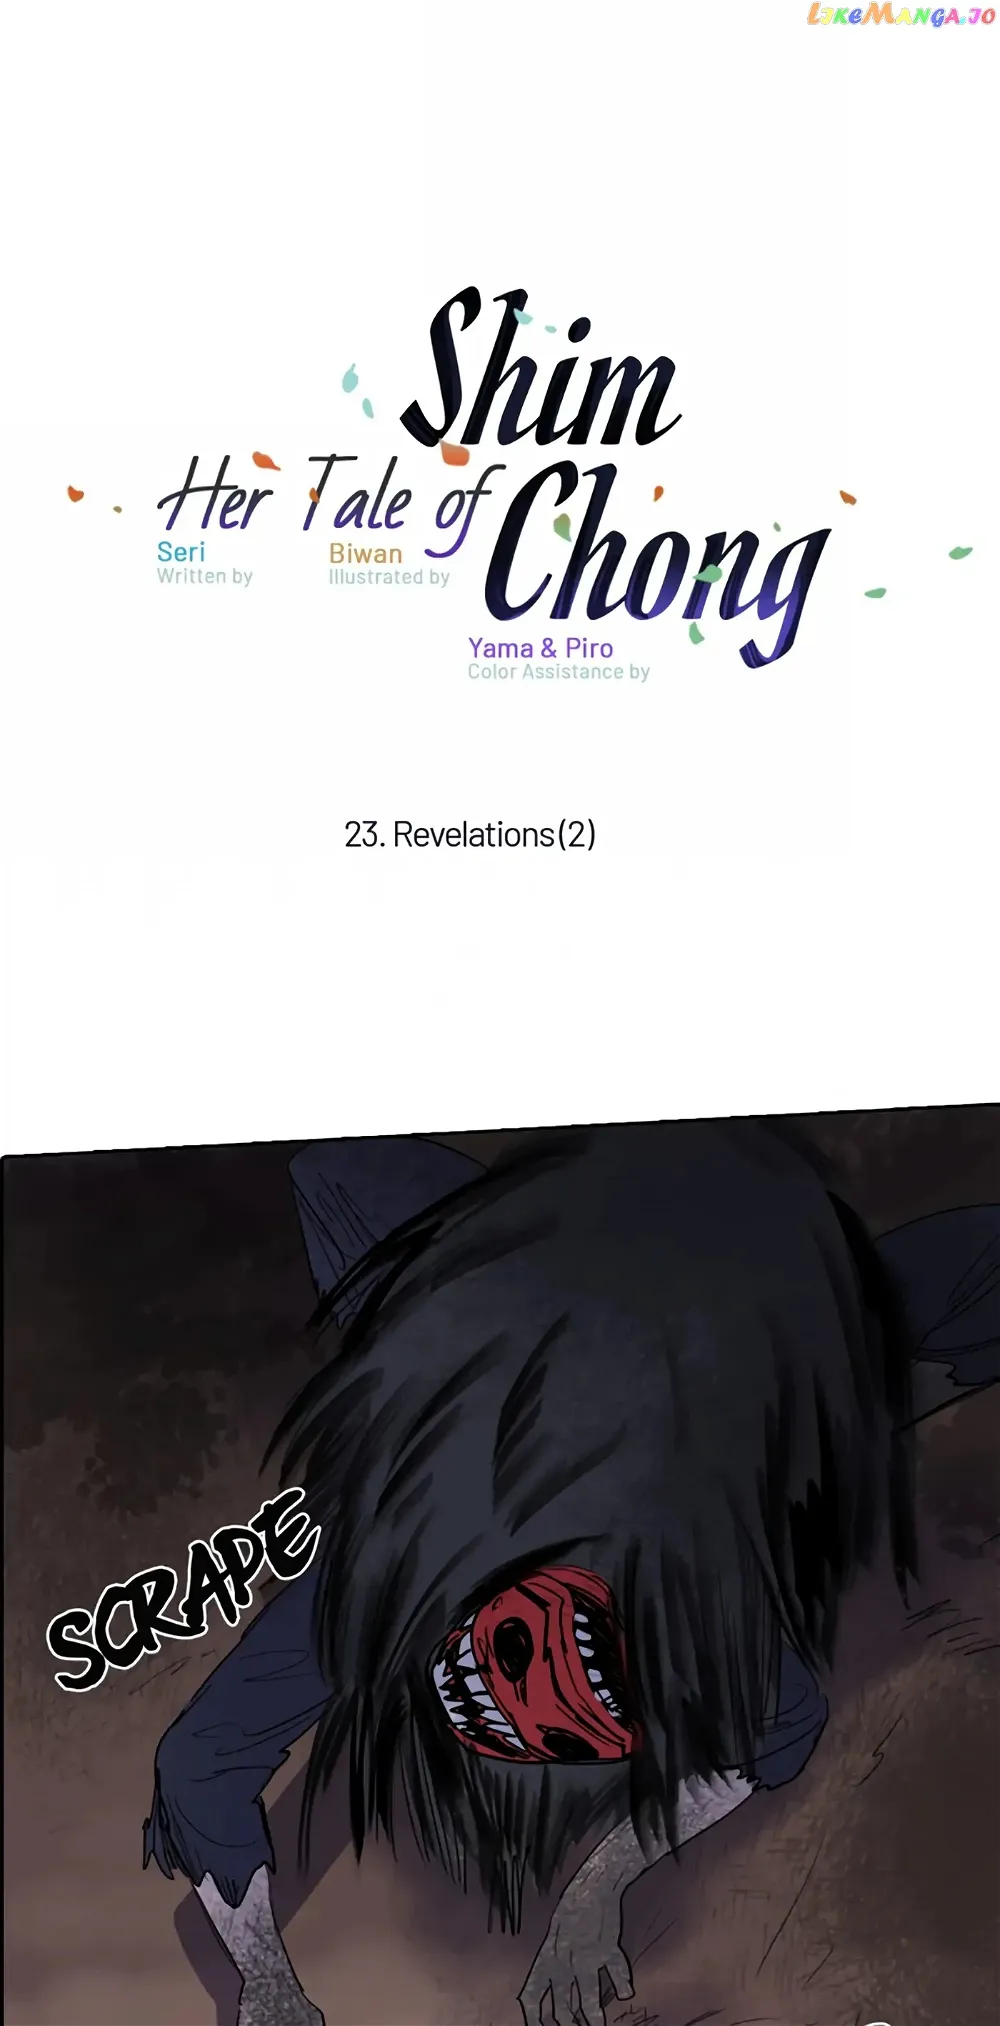 Her Tale of Shim Chong Chapter 23 - Page 1